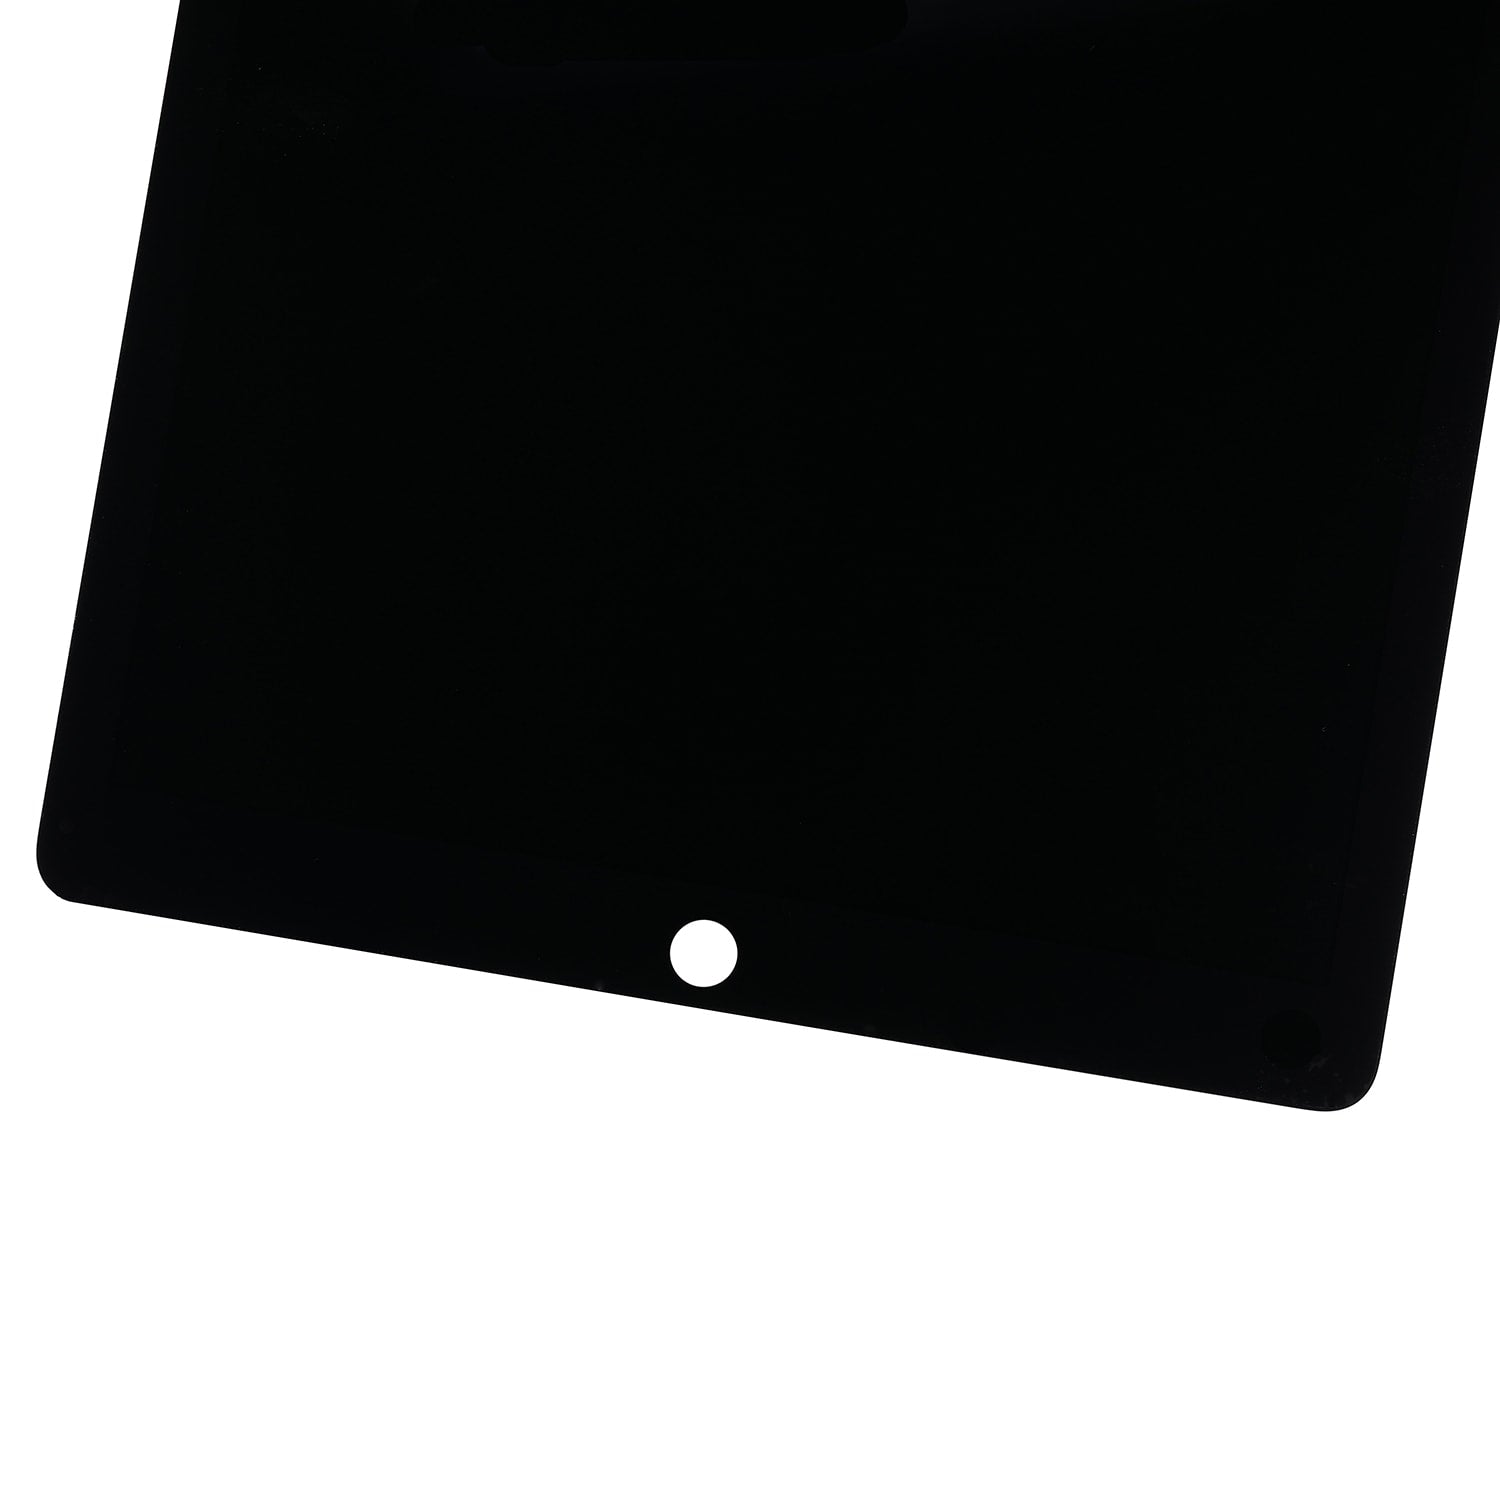 LCD SCREEN AND DIGITIZER ASSEMBLY WITH BOARD FLEX FOR IPAD PRO 12.9" 2ND GEN- (BLACK)